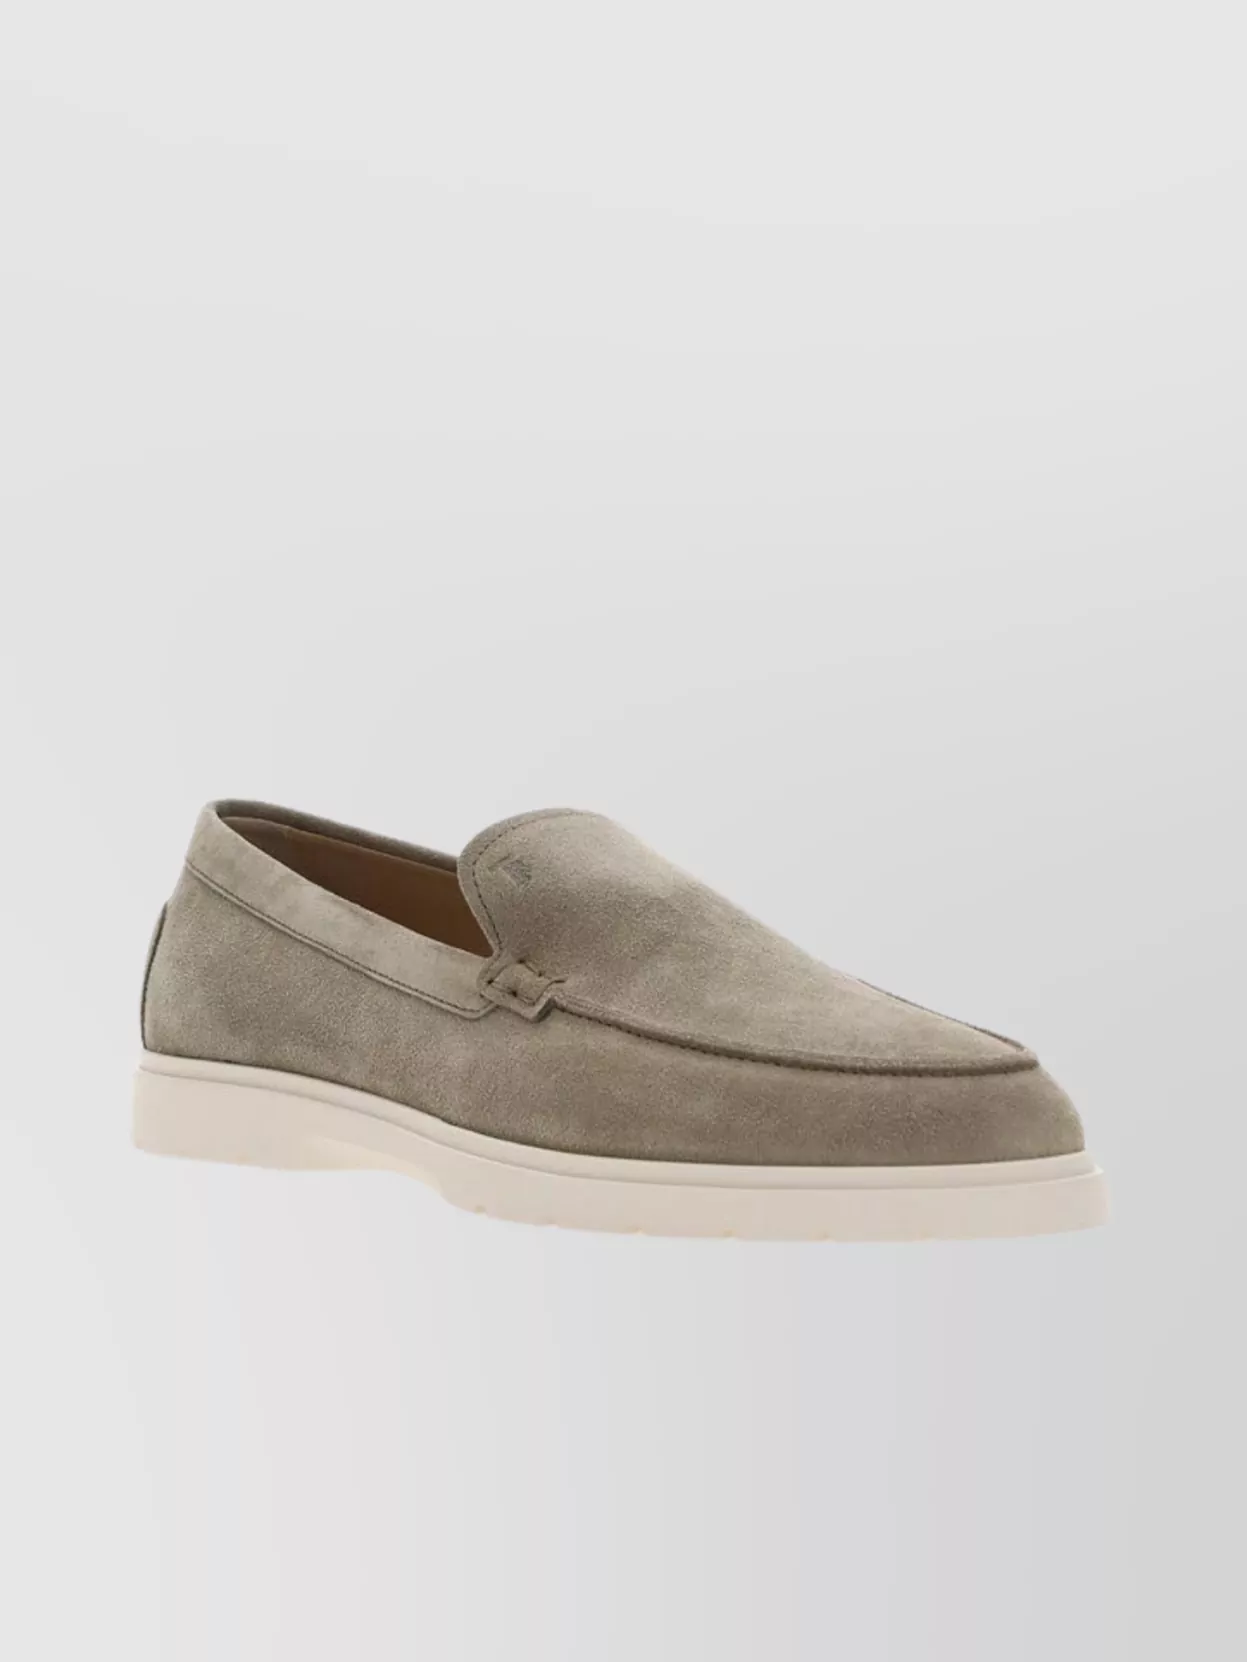 Shop Tod's Summer Hybrid Loafers Featuring Suede Texture